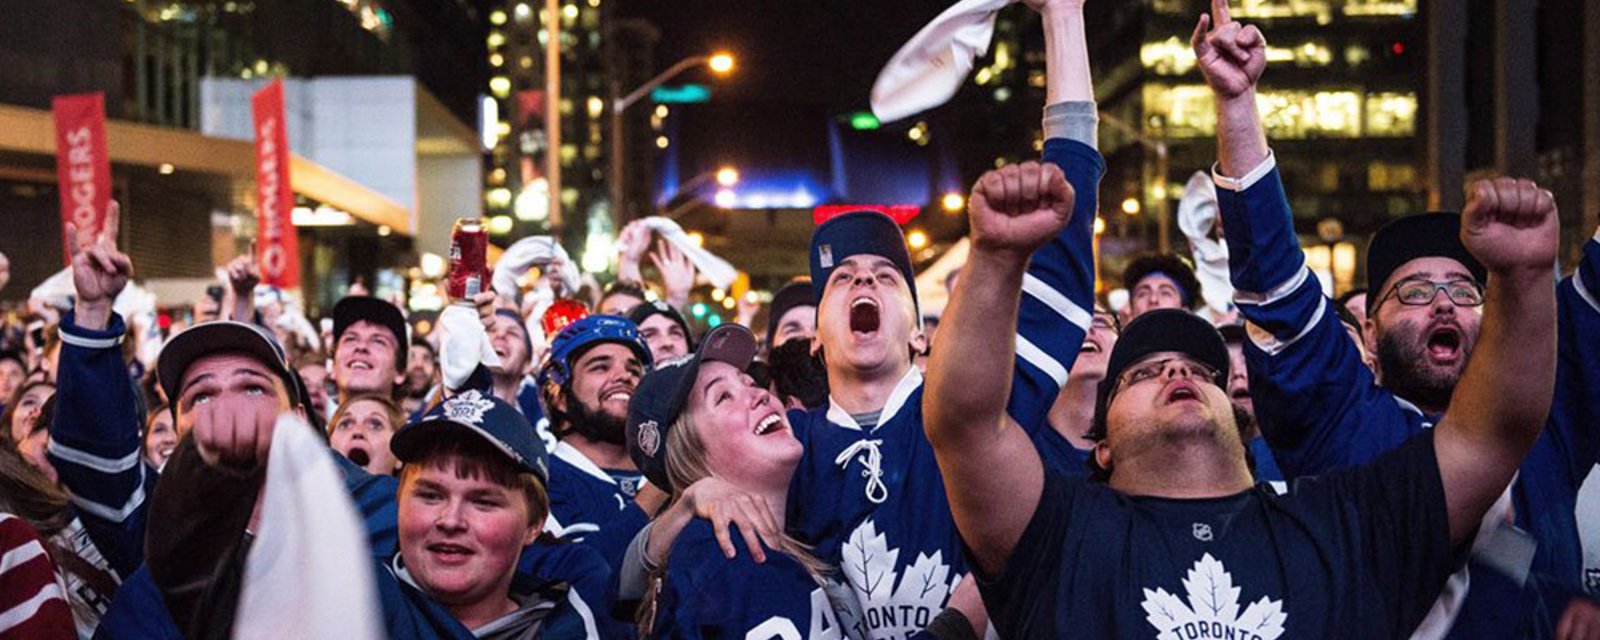 Ontario introduces new regulations allowing Leafs fans to get absolutely BLASTED ahead of Bruins series